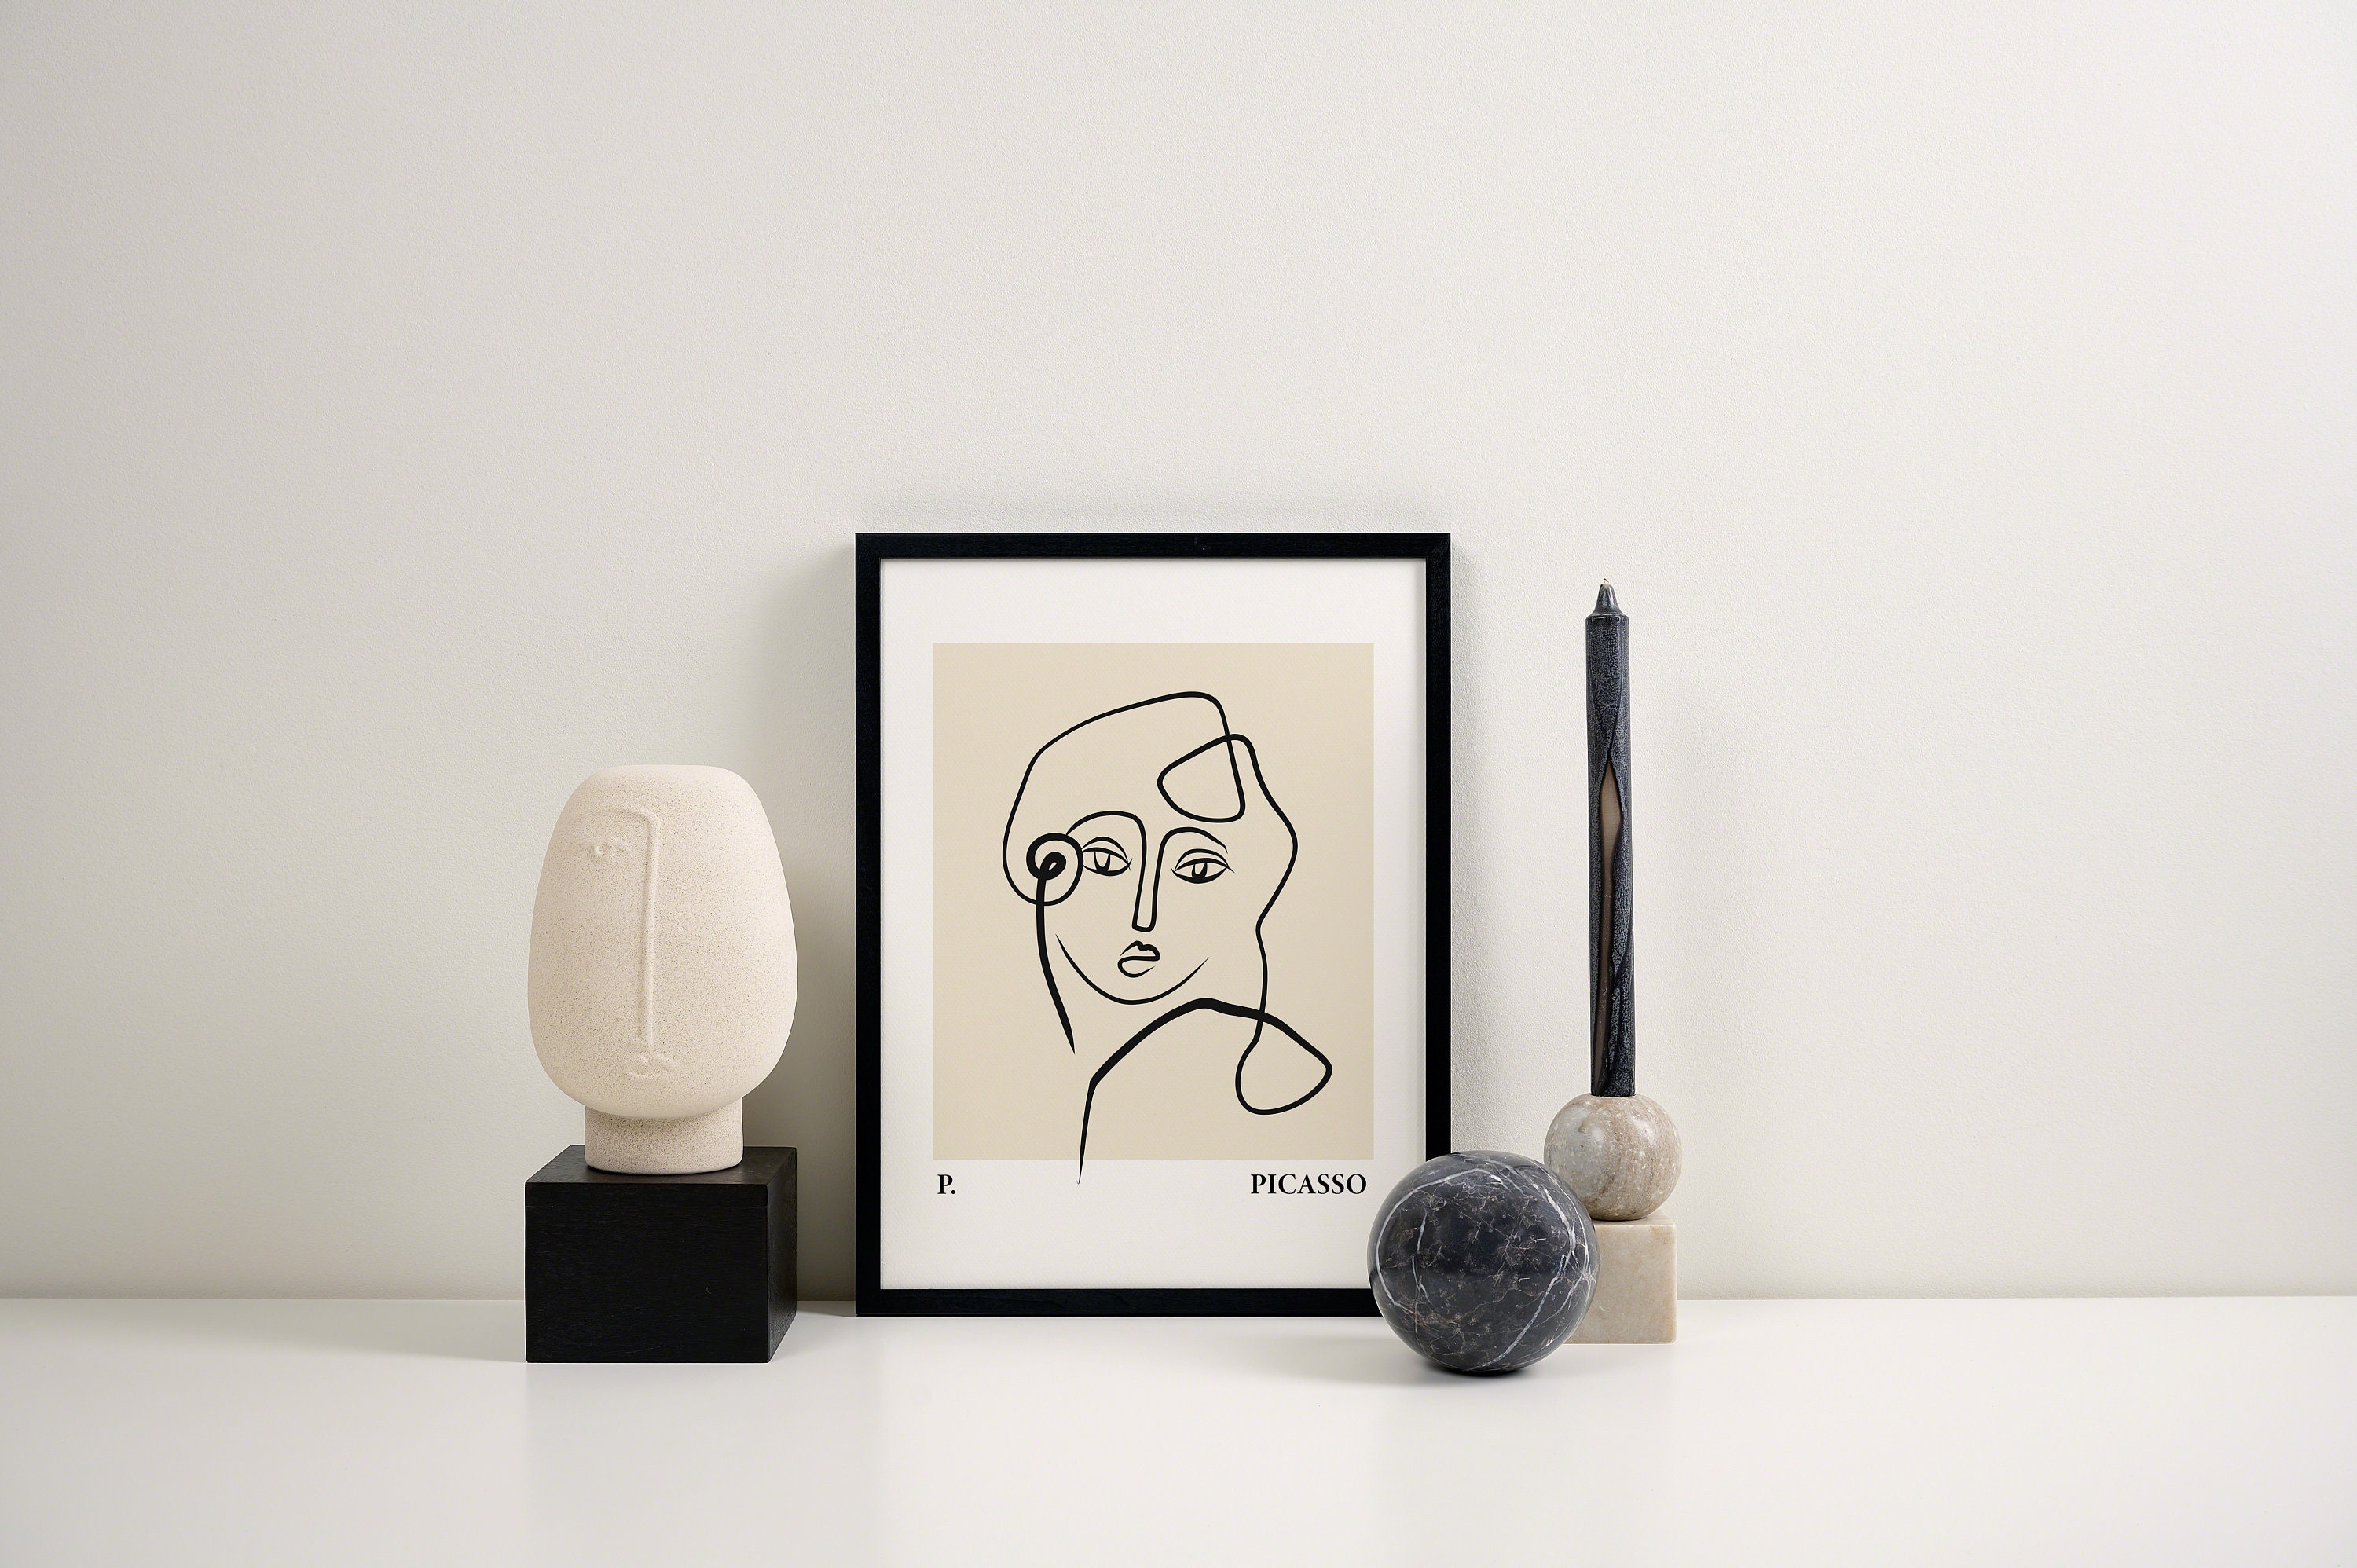 Picasso Print Picasso Drawing Poster Minimalist Printable Etsy